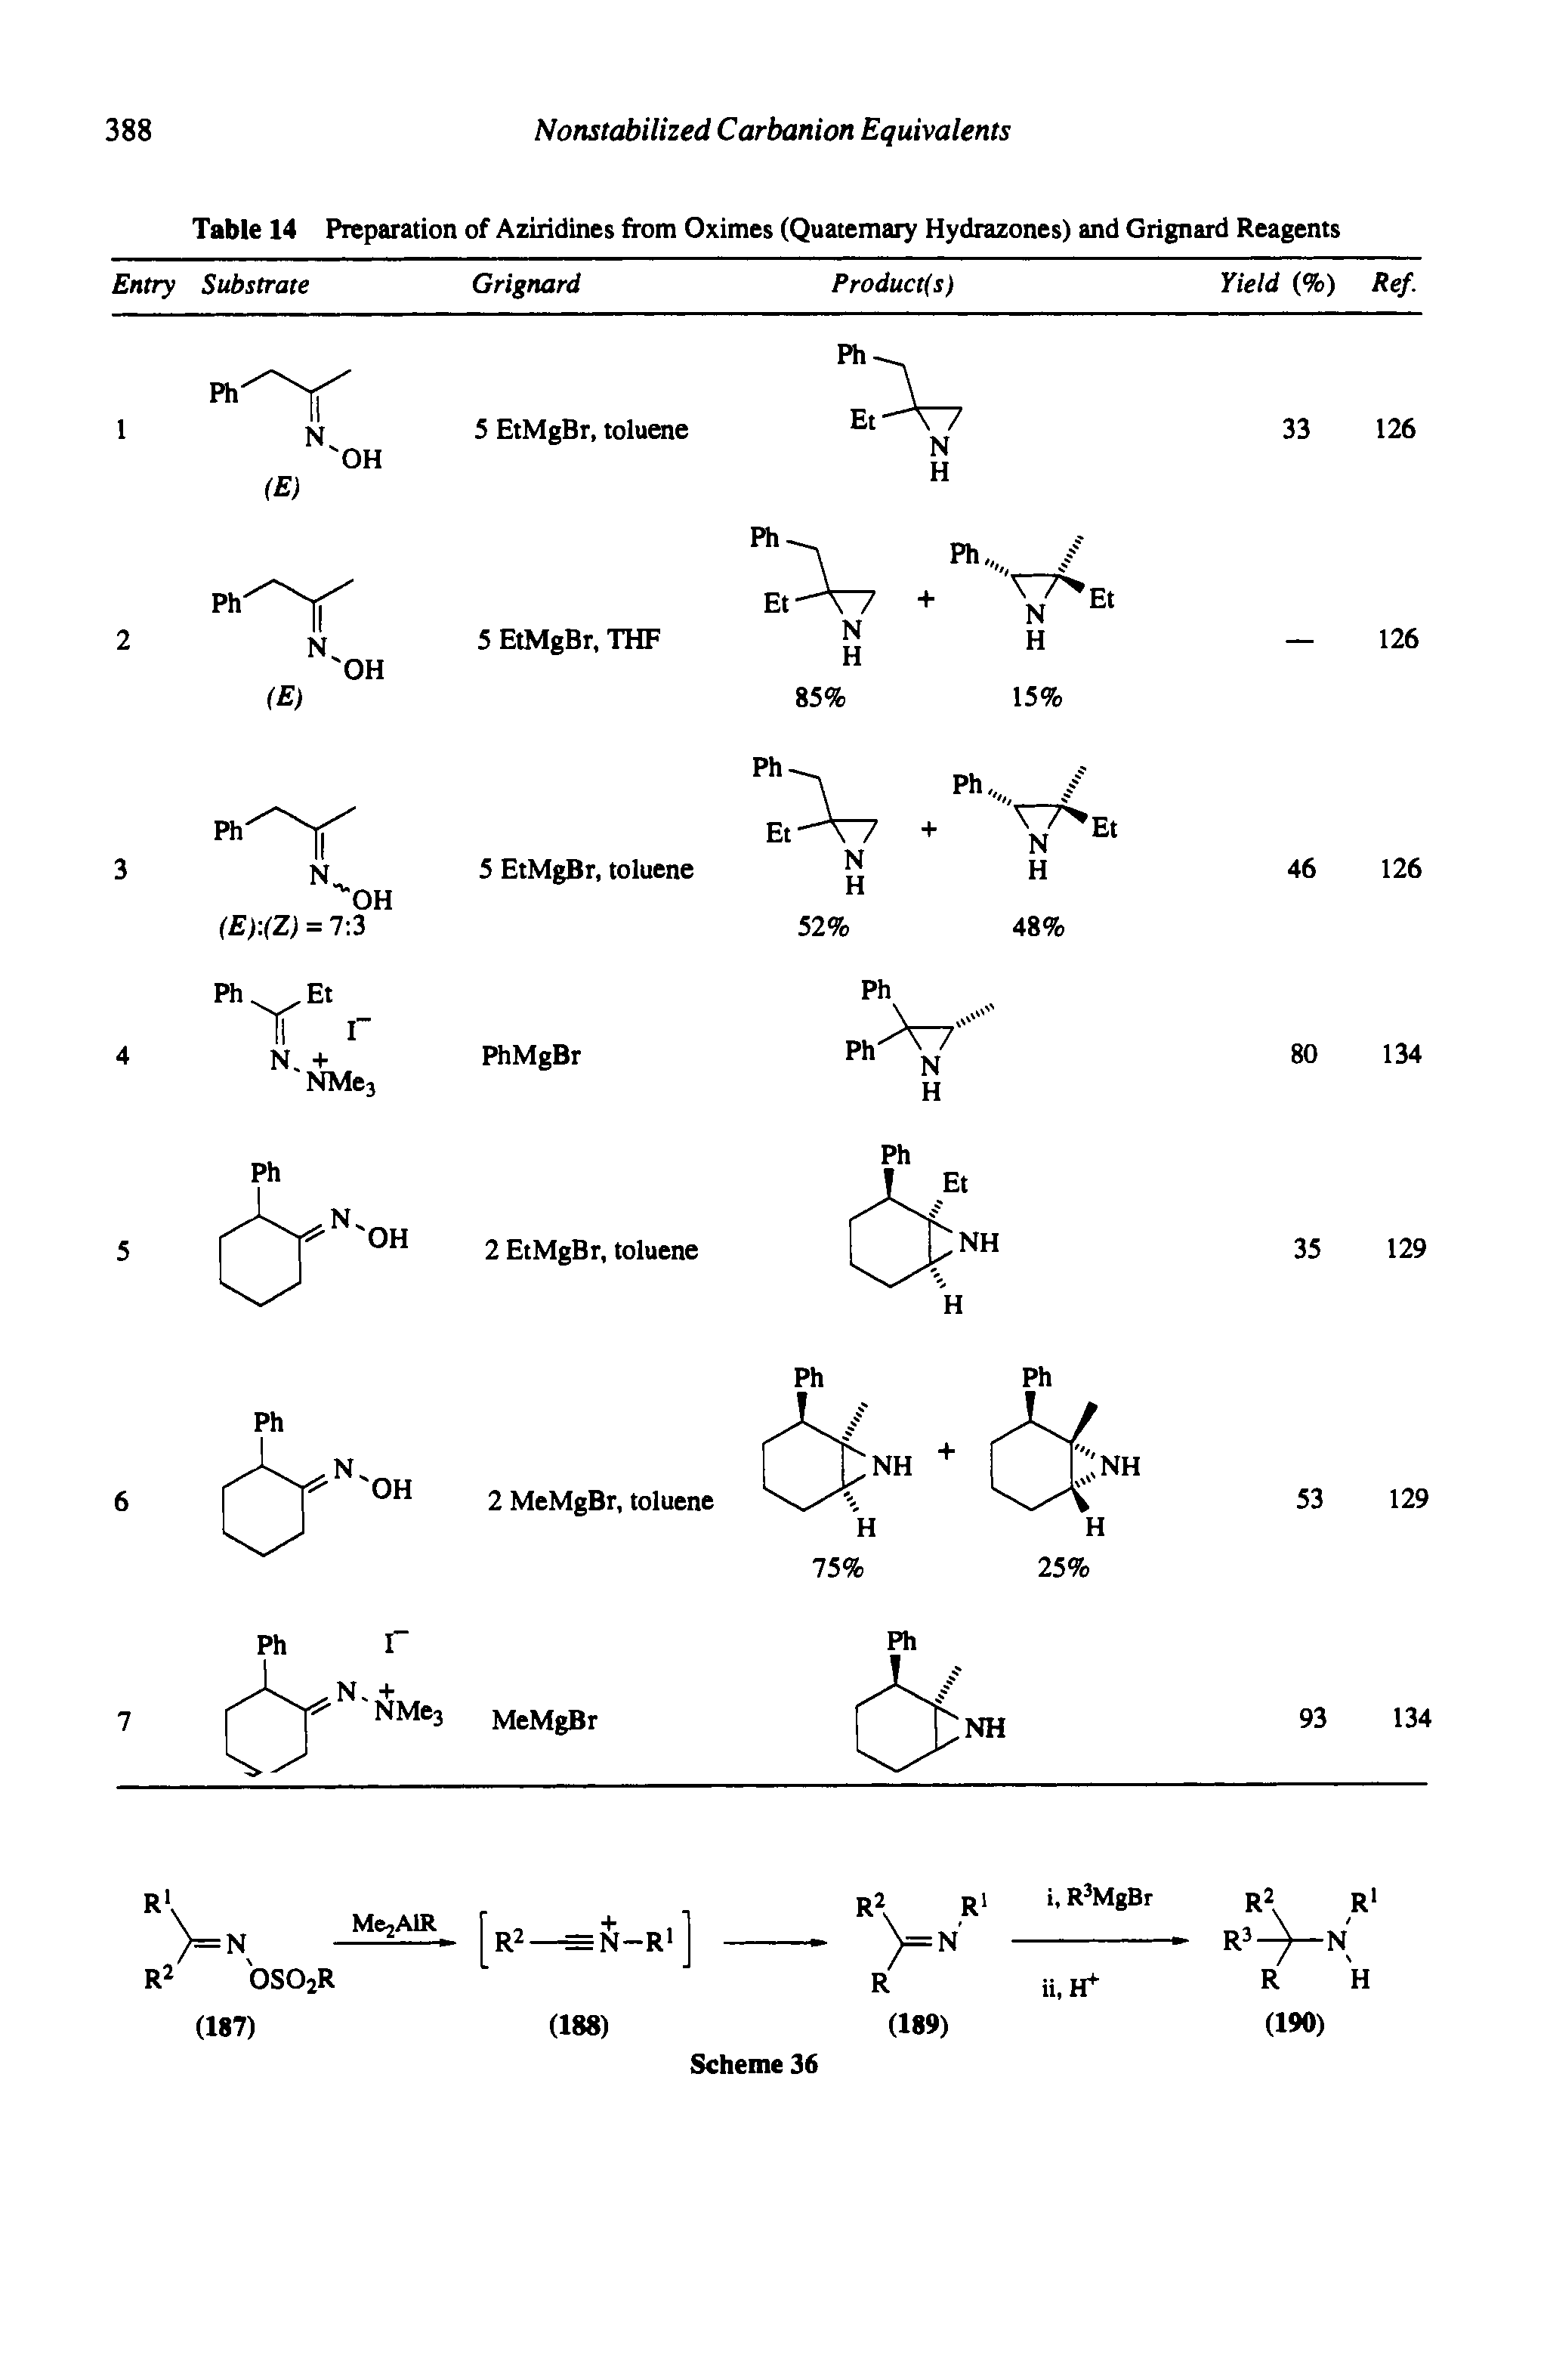 Table 14 Preparation of Aziridines from Oximes (Quaternary Hydrazones) and Grignard Reagents...